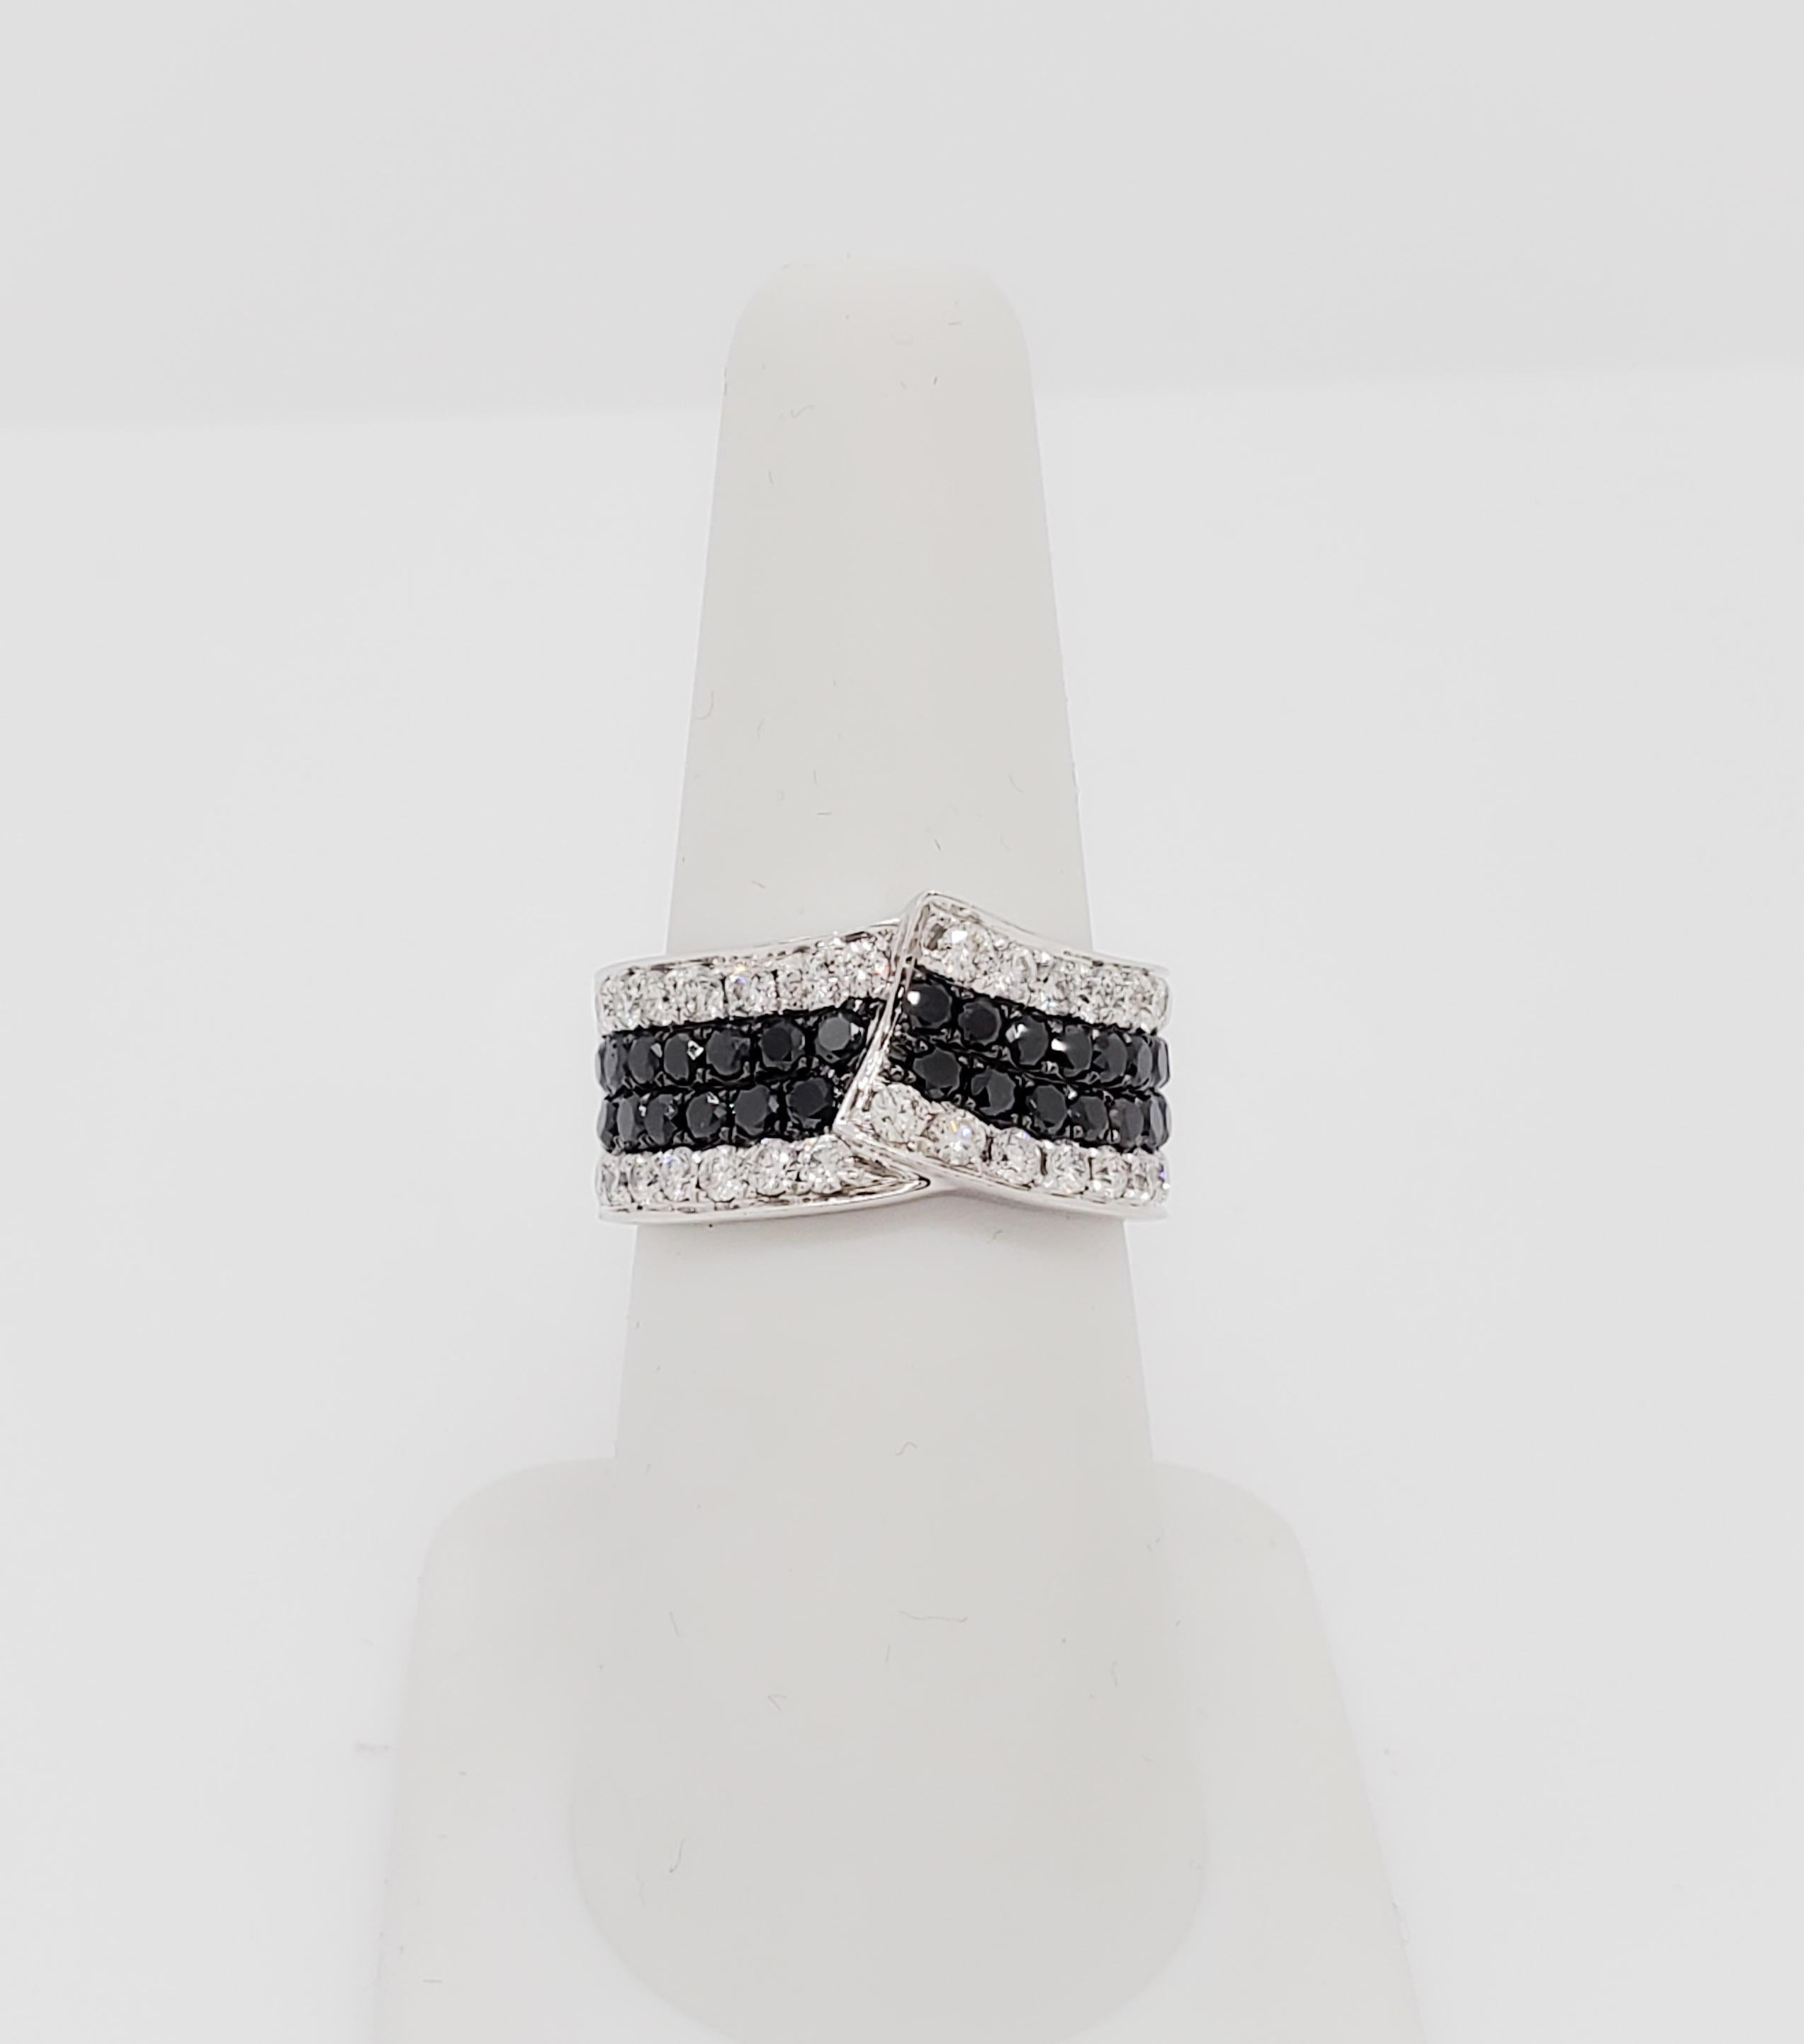 White and Black Diamond Fashion Ring in 14k White Gold For Sale 1